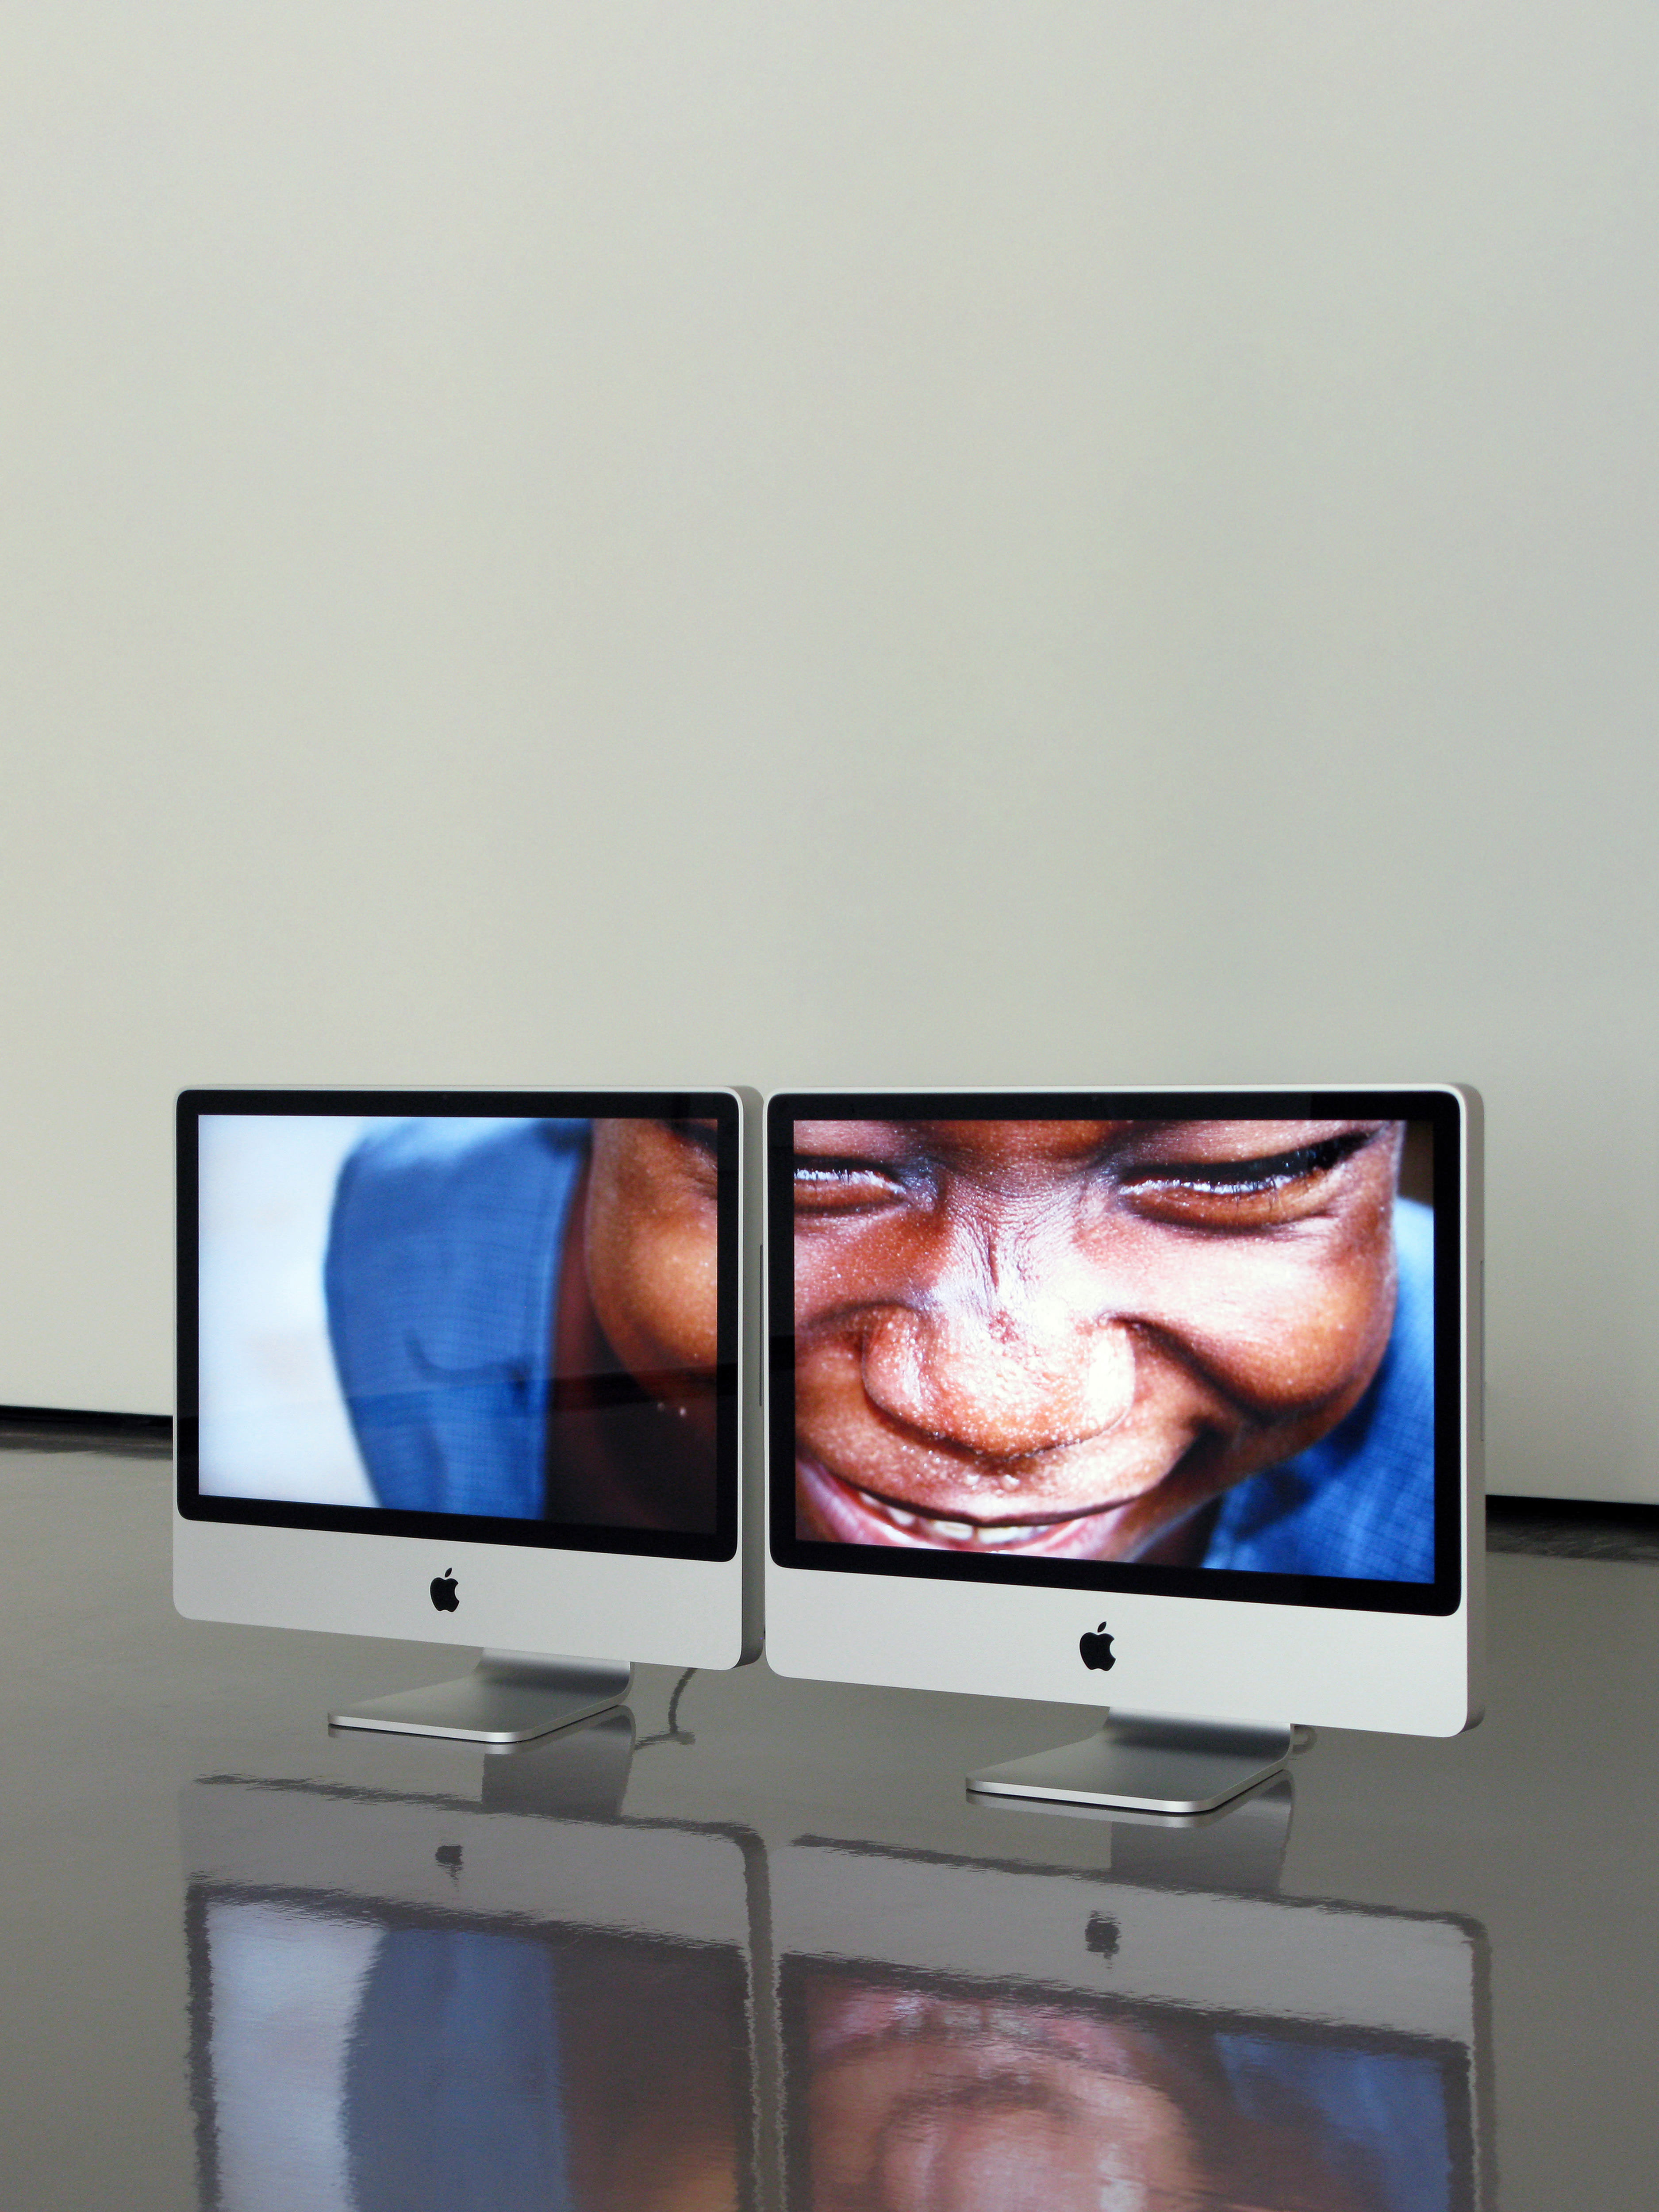 Massimo Grimaldi, EMERGENCY’s Surgical Centre in Goderich, Photos Shown on Two Apple iMac Core 2 Duos, 2008 (Courtesy of the artist and ZERO…, Milan)